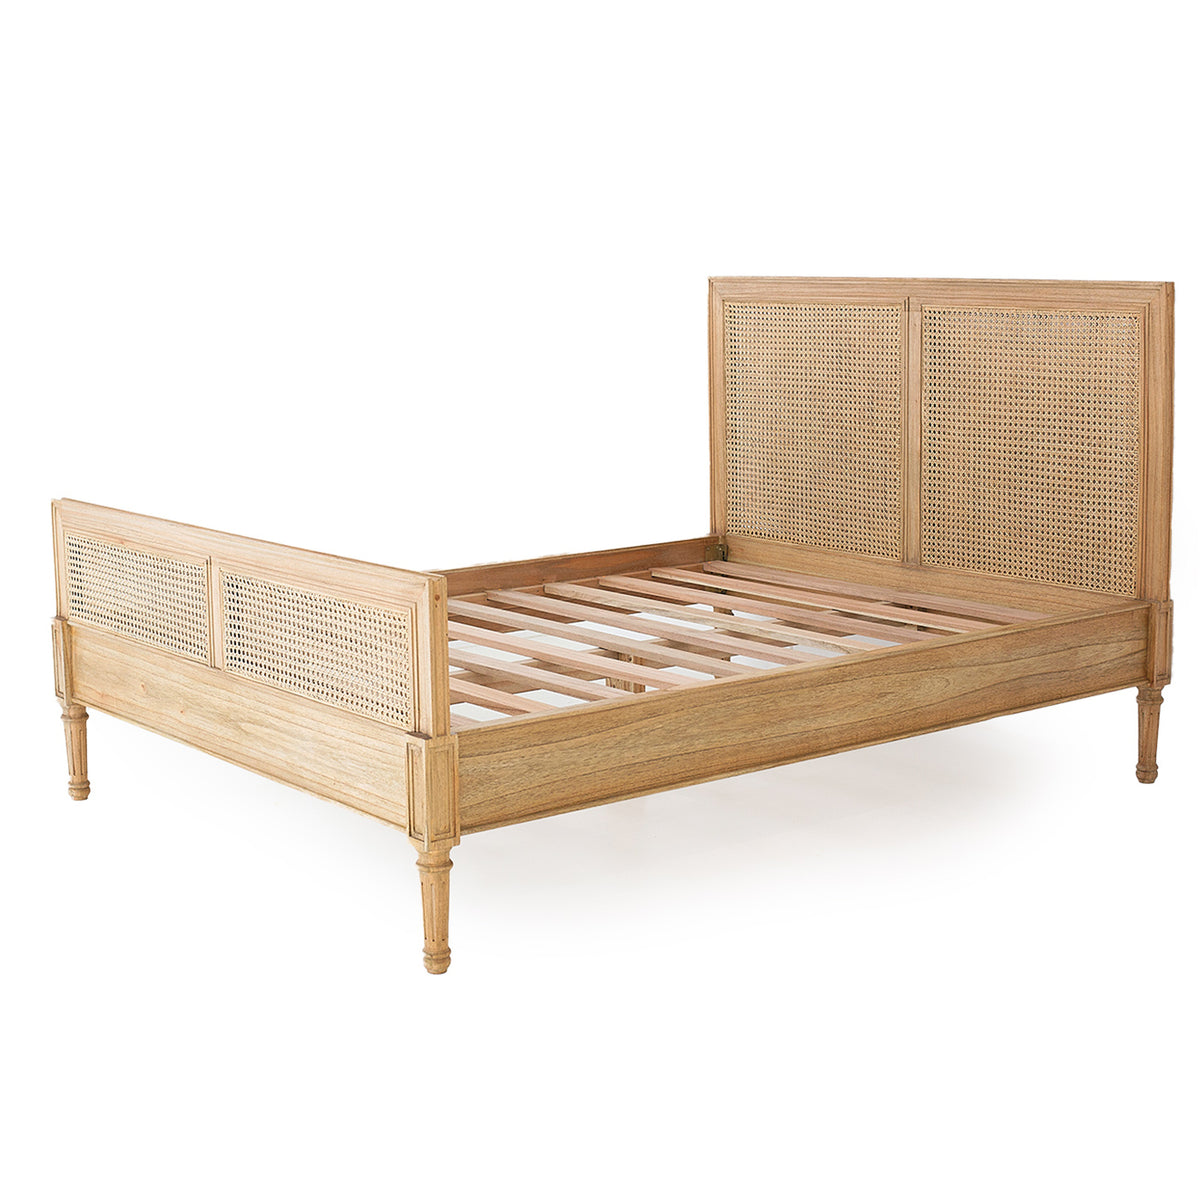 Percy Timber and Cane Bed -  Weathered Oak Range - Notbrand(2)